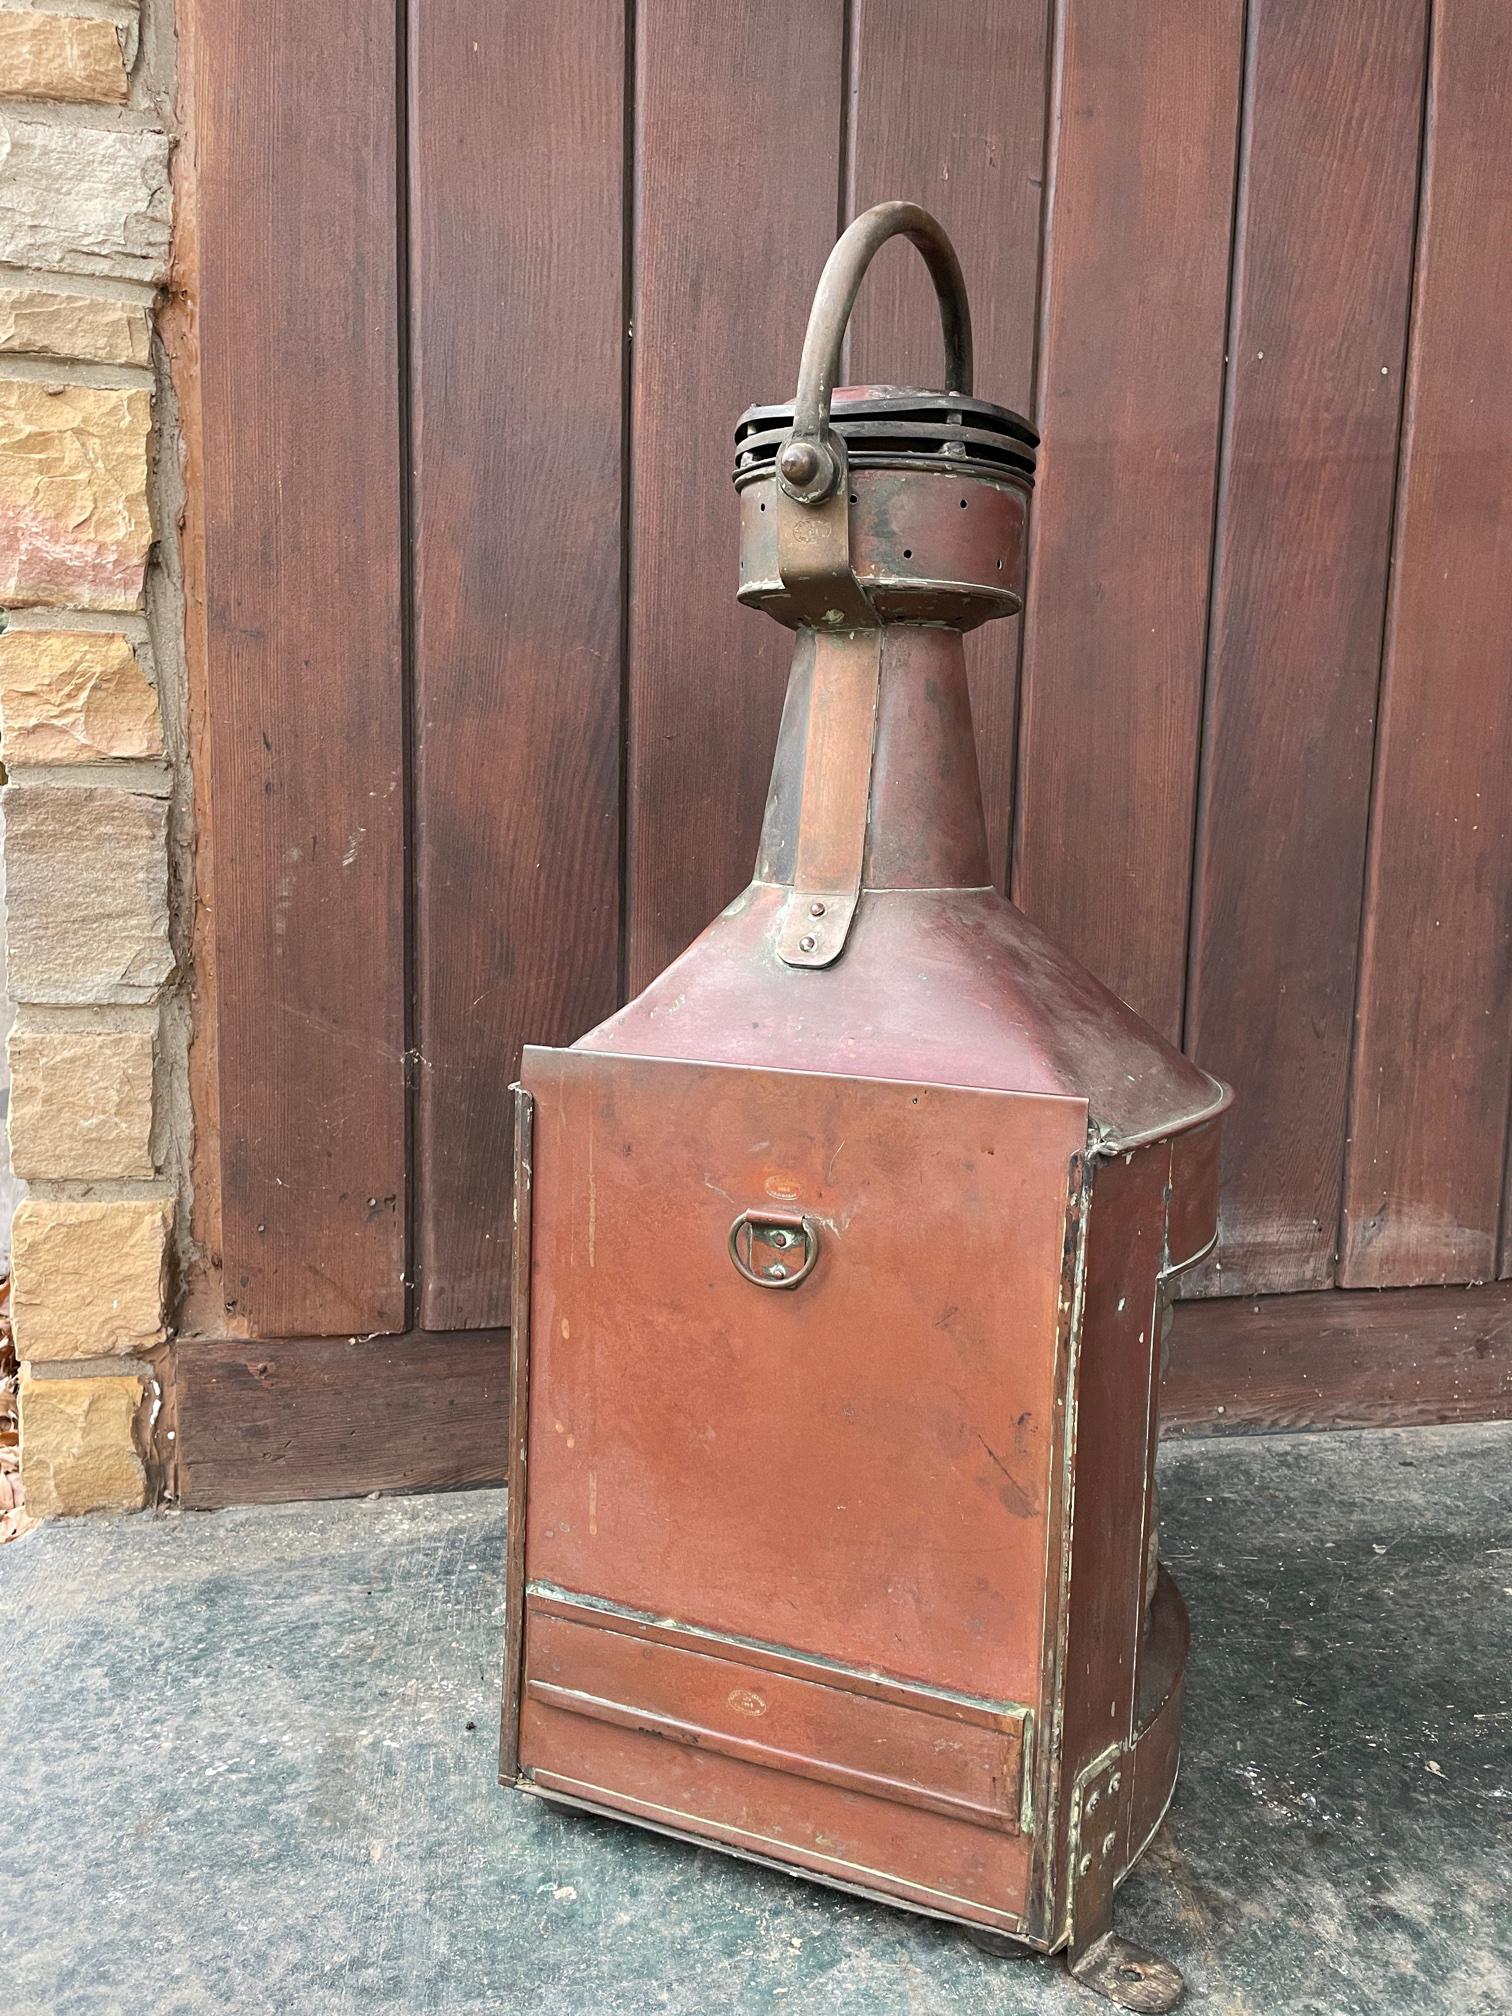 Rare to be presented in unmolested and unpolished condition. No electric light source, would need this to be added.

A large C.P.G. & Sons STARBOARD copper and brass ships lantern with fresnel lens, one small chip to lens, marked, C.P.G. & Sons